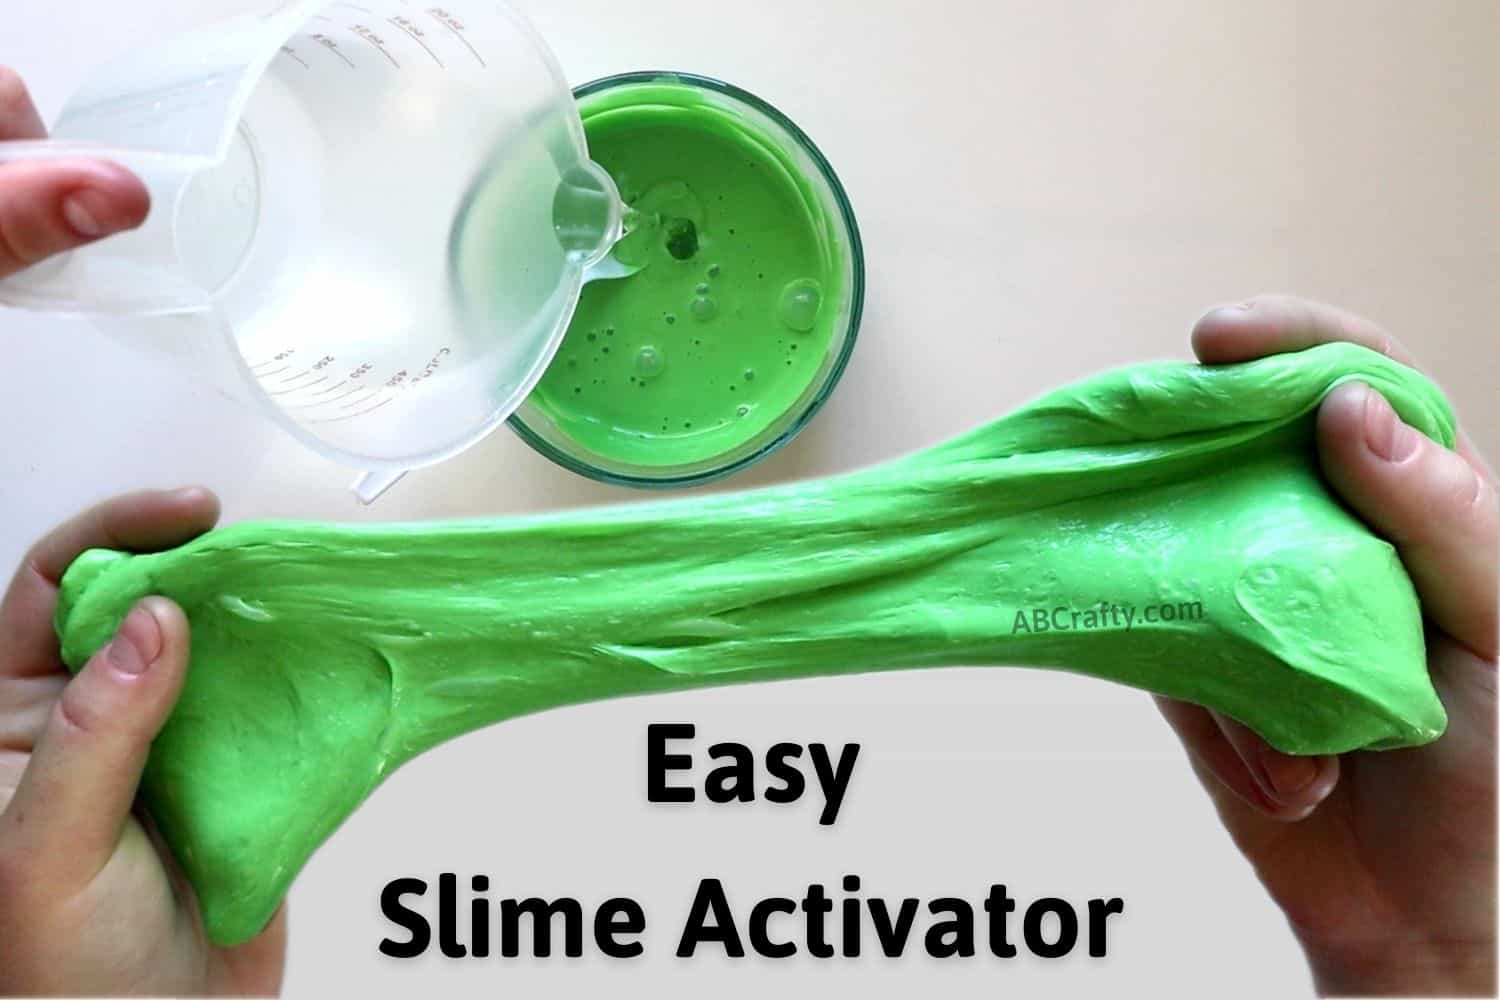 3 Easy Ways to Activate Slime Without Activator - wikiHow